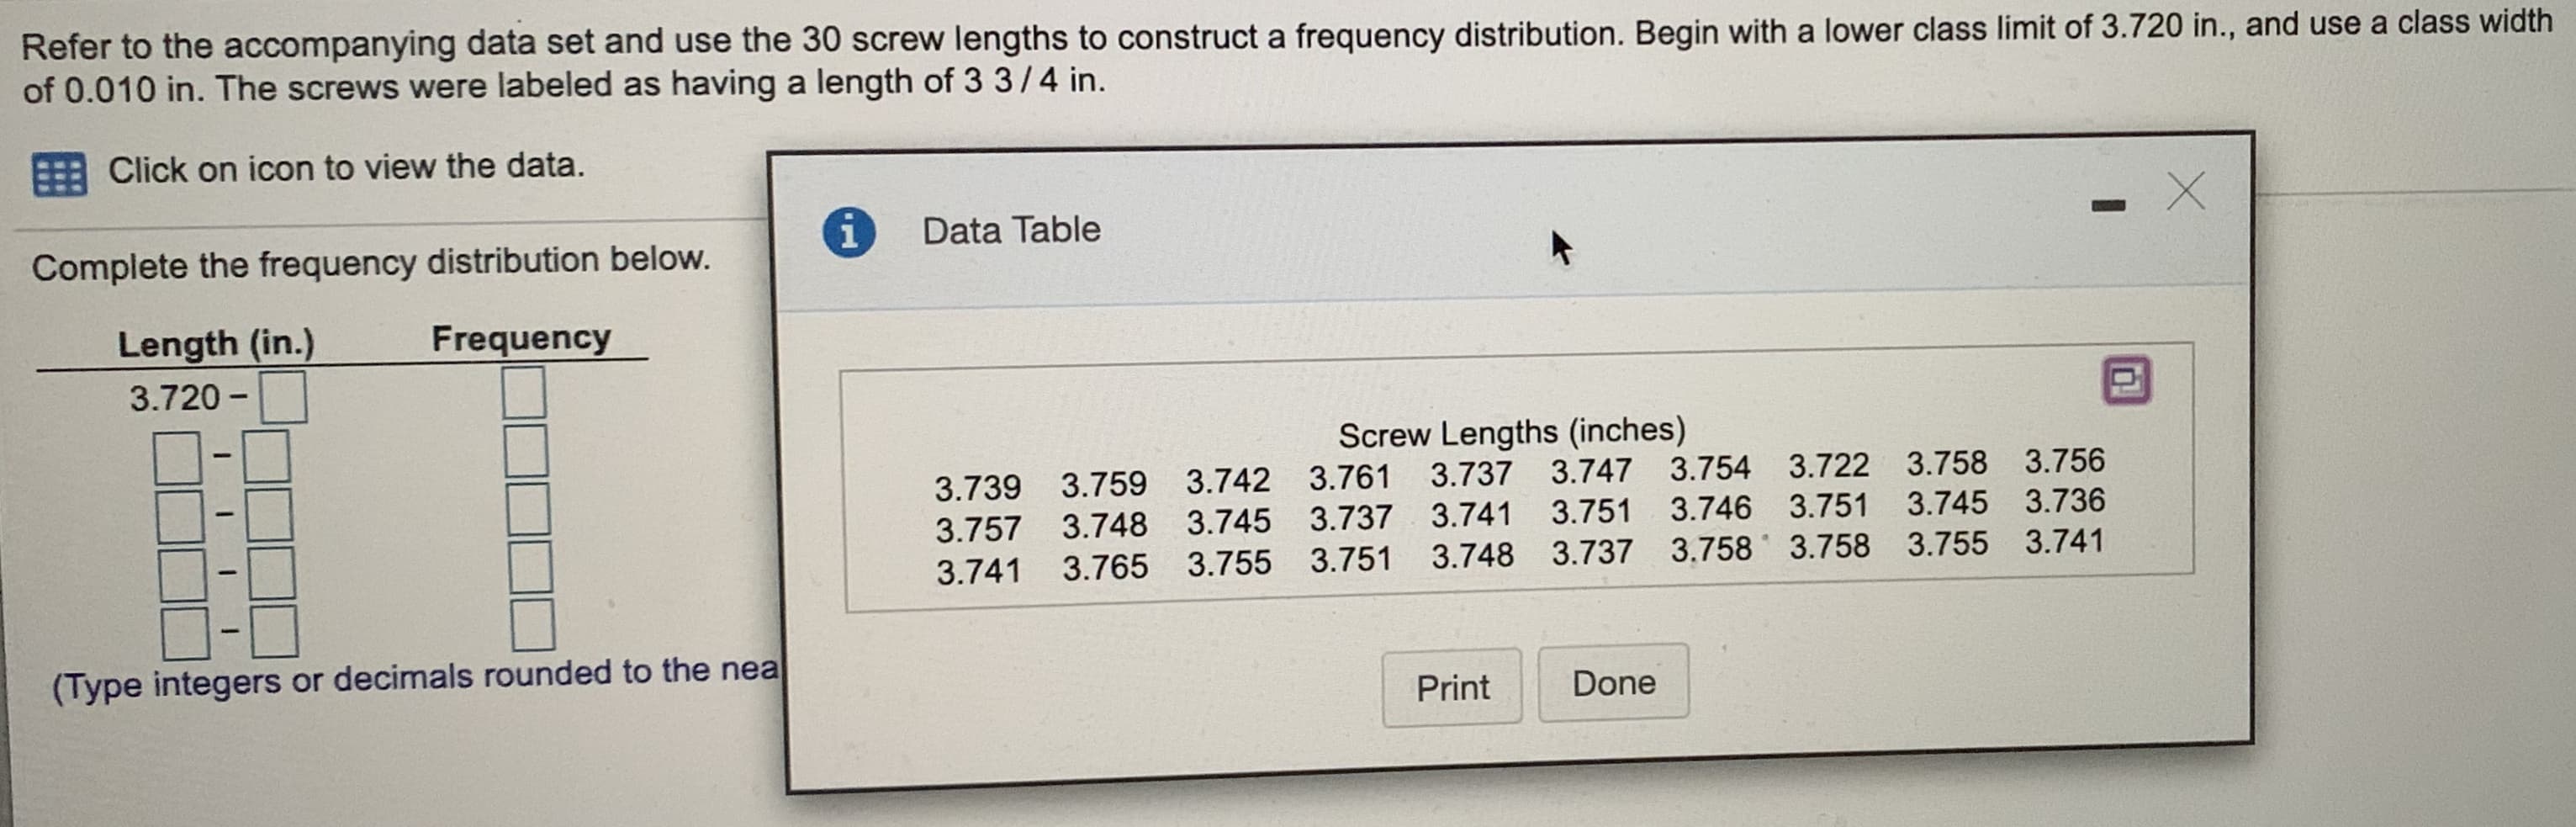 Refer to the accompanying data set and use the 30 screw lengths to construct a frequency distribution. Begin with a lower class limit of 3.720 in., and use a class width
of 0.010 in. The screws were labeled as having a length of 3 3/4 in.
: Click on icon to view the data.
i
Data Table
Complete the frequency distribution below.
Length (in.)
Frequency
3.720 -
Screw Lengths (inches)
3.739 3.759 3.742 3.761 3.737 3.747
3.751
3.754 3.722 3.758 3.756
3.757 3.748 3.745 3.737 3.741
3.746 3.751 3.745 3.736
3.741
3.765 3.755 3.751 3.748 3.737 3.758 3.758 3.755 3.741
(Type integers or decimals rounded to the nea
Print
Done
